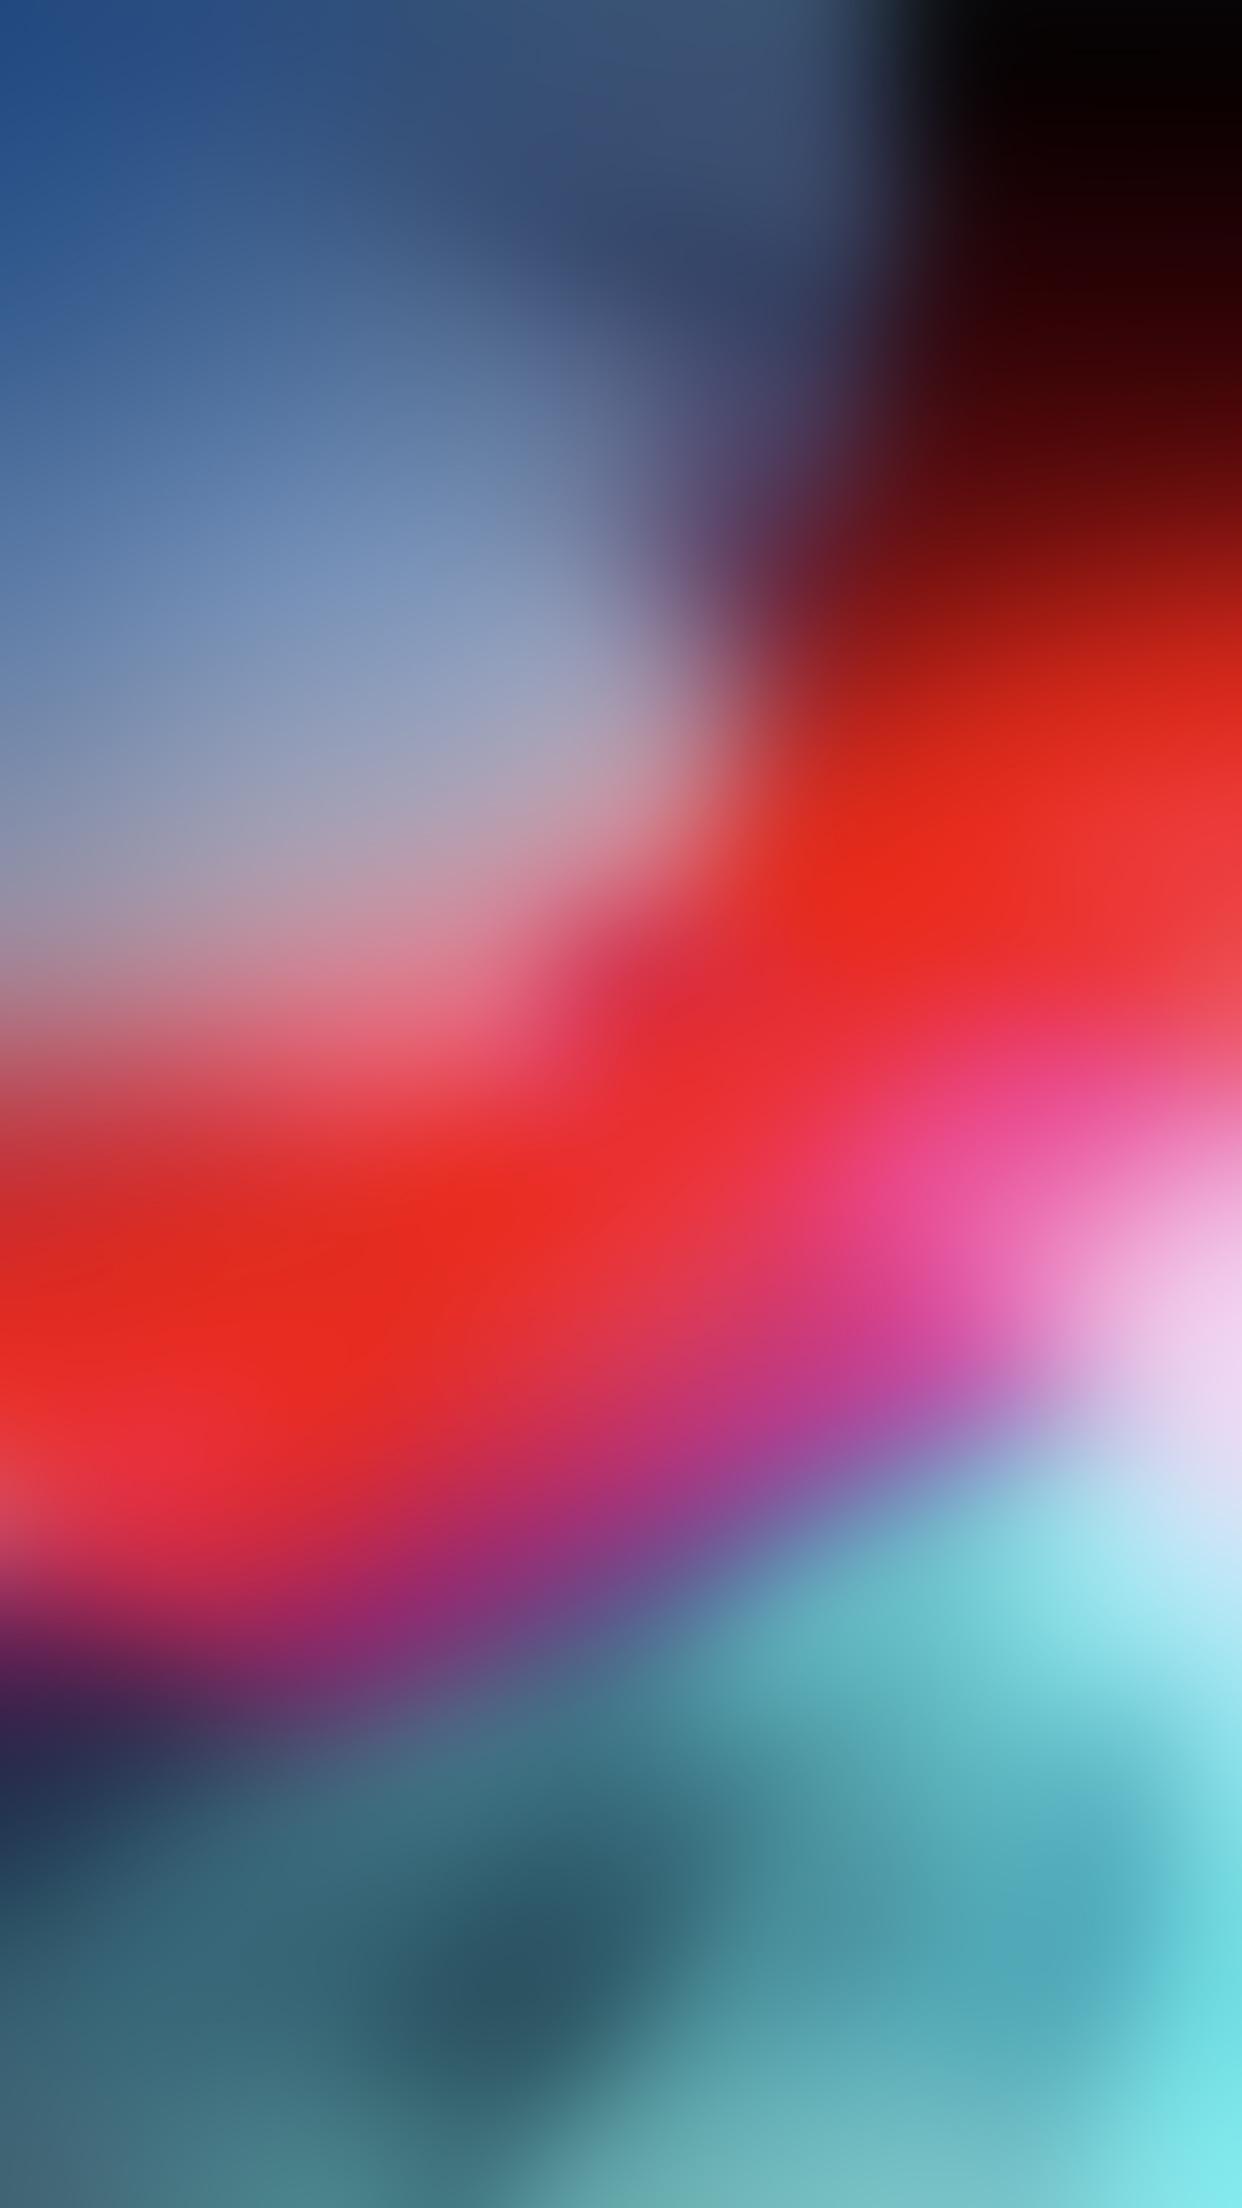 1242 x 2208 · jpeg - Blurred iOS 12 Stock Wallpaper - Wallpapers Central